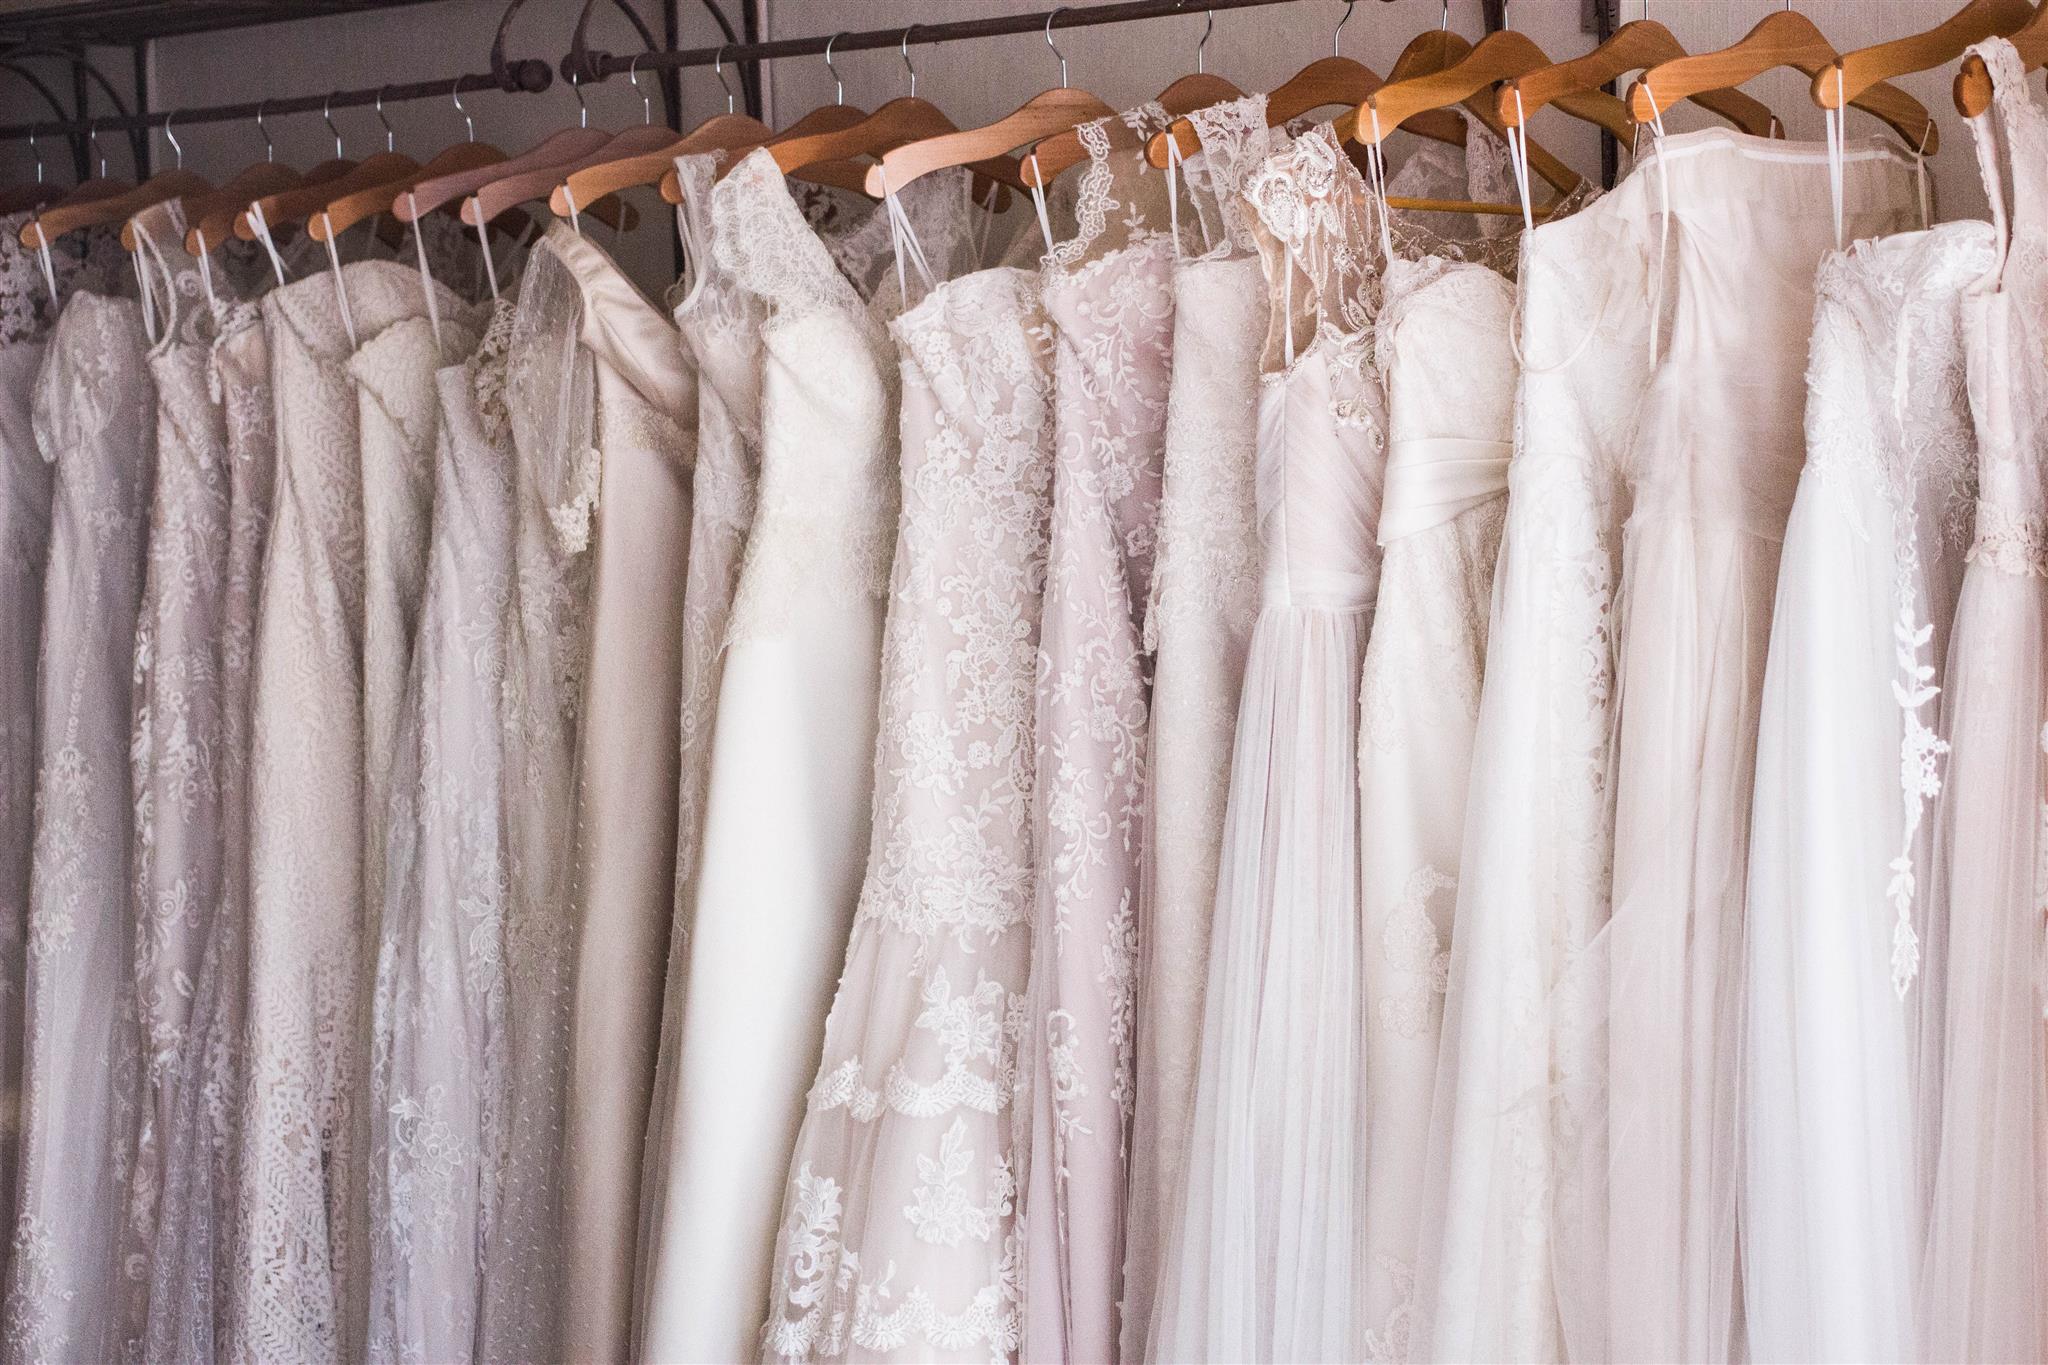 How to DIY Your Wedding Dress: Some Tips from Professionals